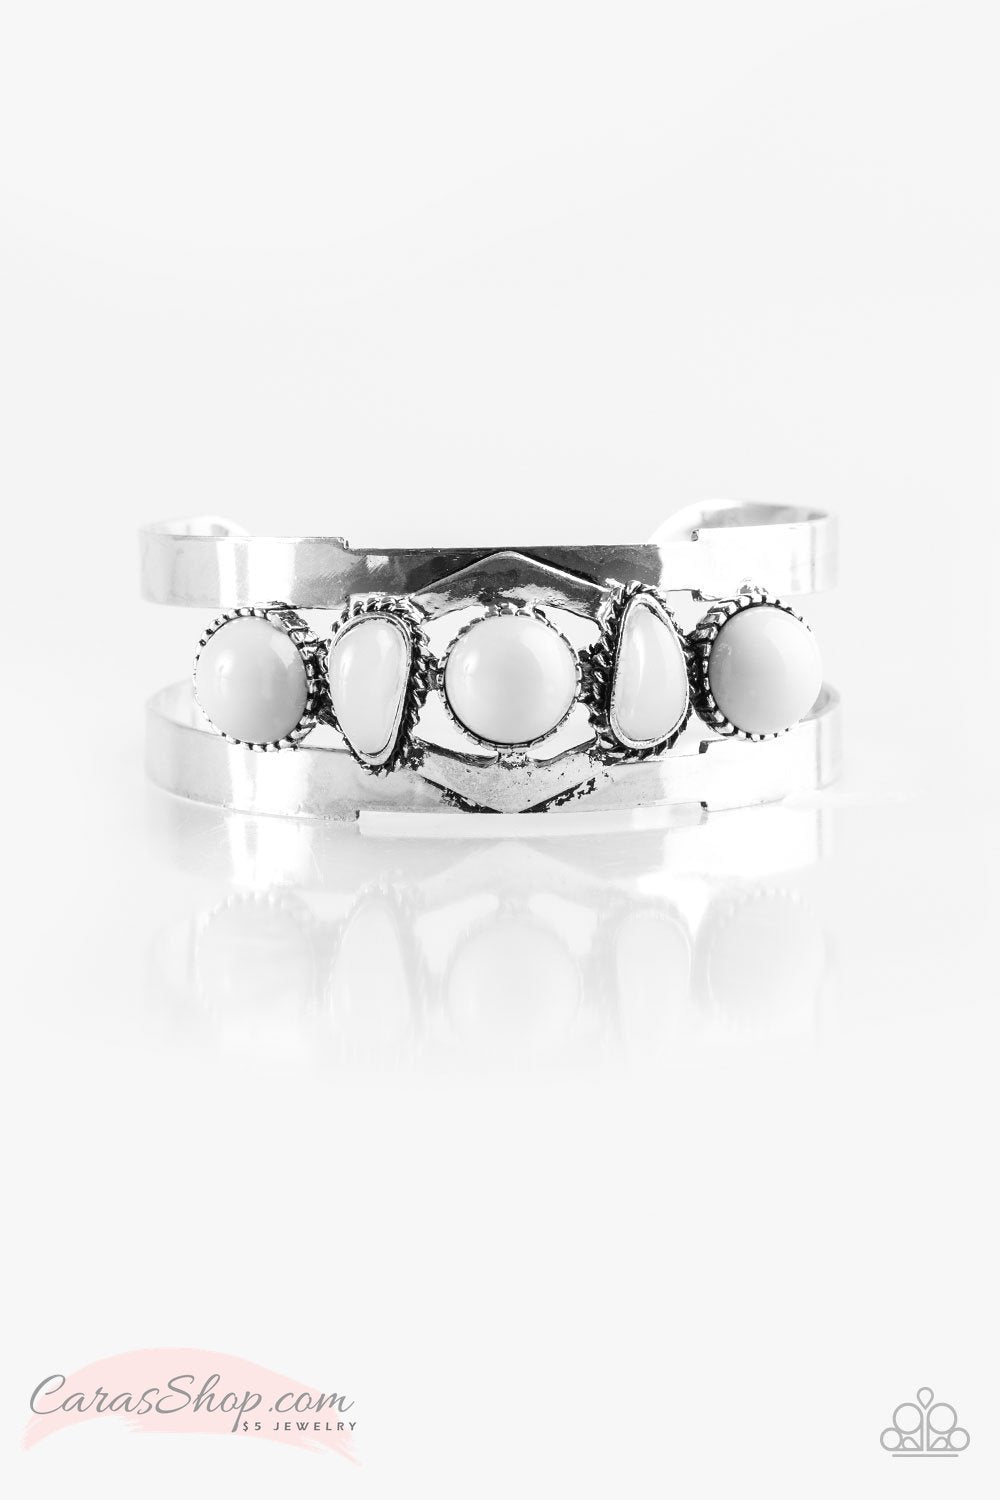 Keep On TRIBE-ing White and Gray Silver Cuff Bracelet - Paparazzi Accessories-CarasShop.com - $5 Jewelry by Cara Jewels